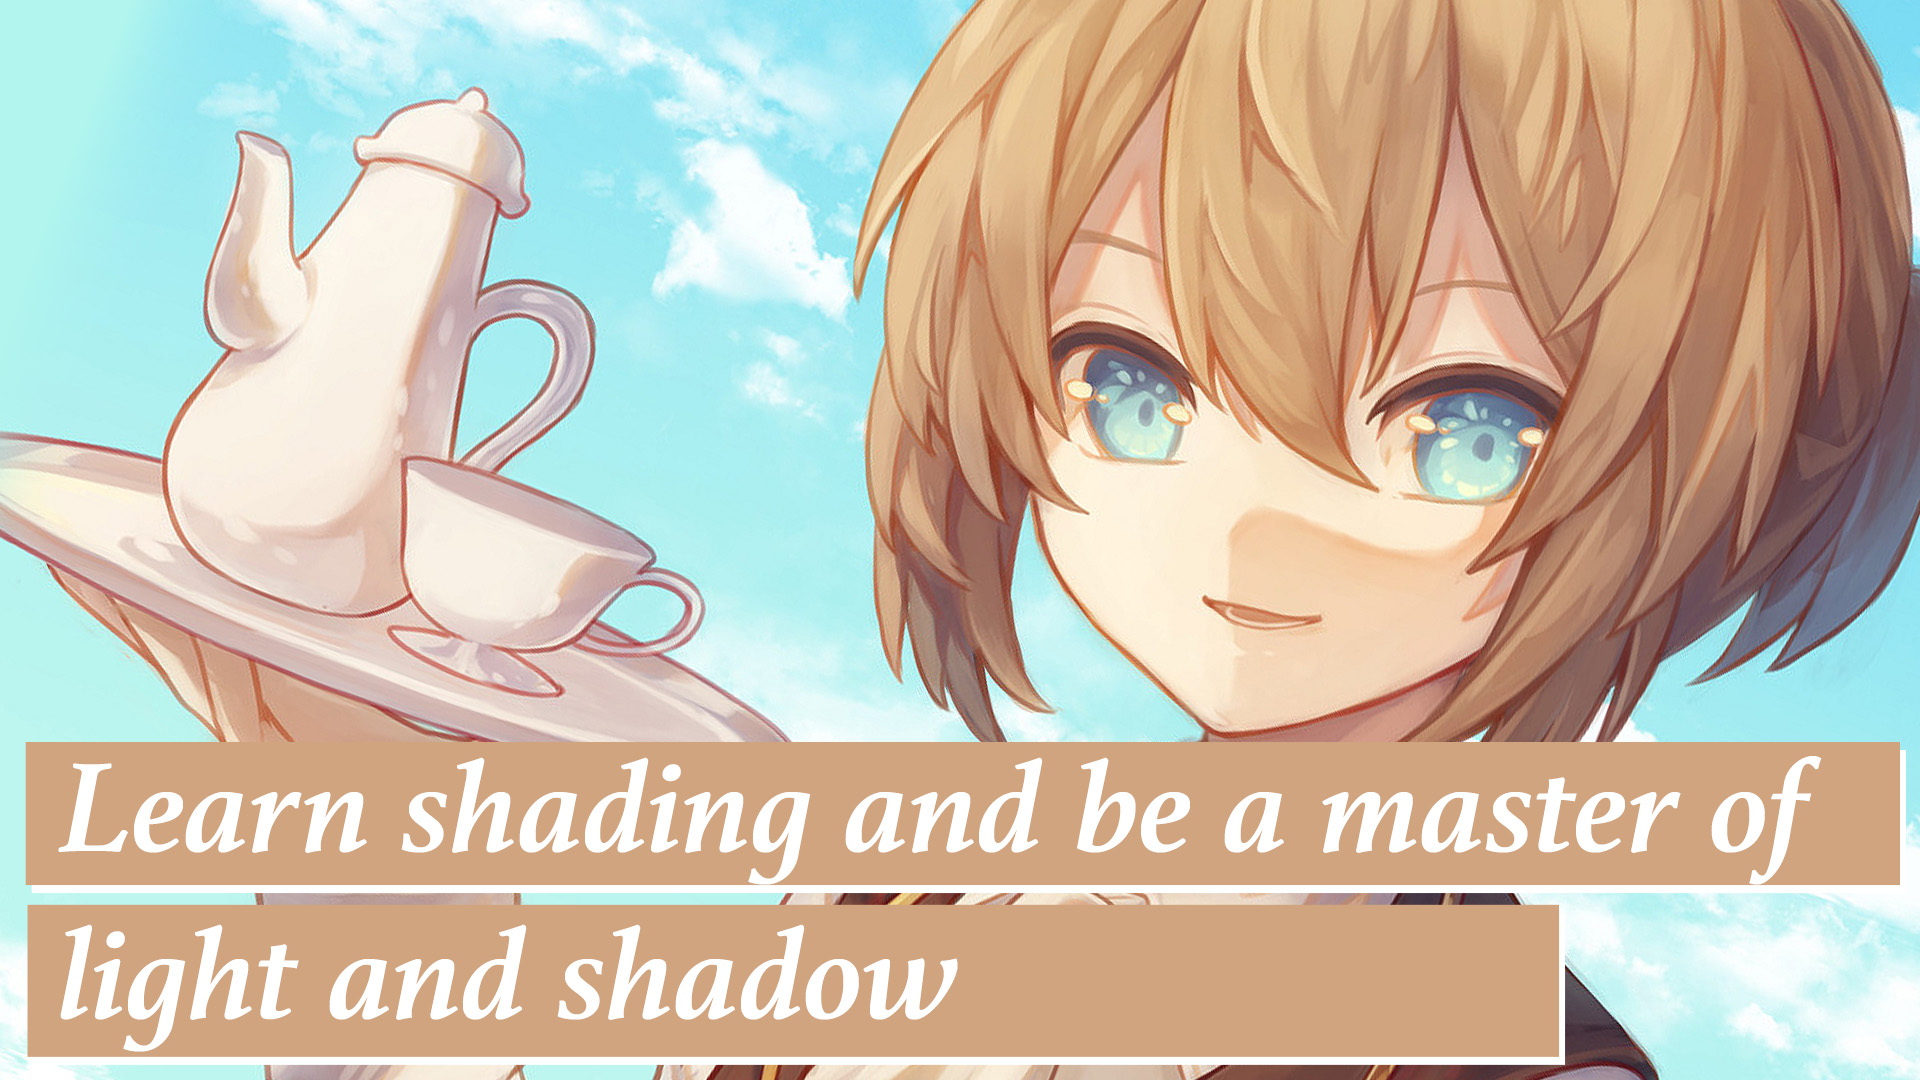 Learn shading and be a master of light and shadow